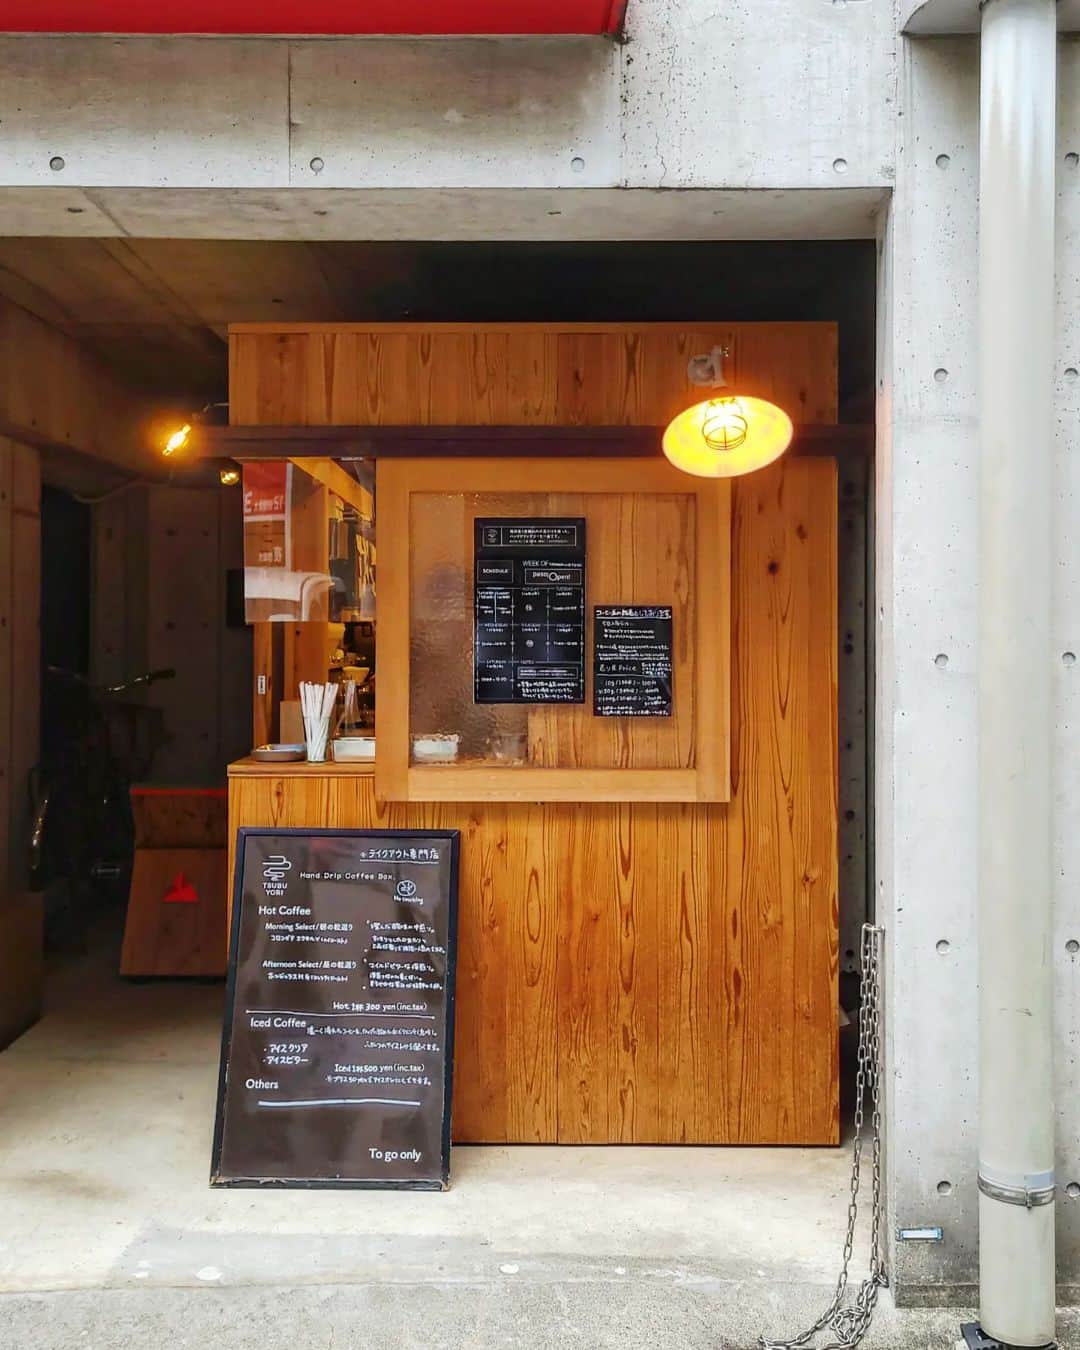 CAFE-STAGRAMMERのインスタグラム：「When is the best time to drink coffee for you? 食欲の秋、珈琲欲の秋♪  #浜町 #☕ #浜町カフェ #浜町コーヒースタンド #hamacho #TSUBUYORI #tsubuyoricoffee #cafetyo #tokyocafe #カフェ #cafe #tokyo #咖啡店 #咖啡廳 #咖啡 #카페 #คาเฟ่ #Kafe #coffeeaddict #カフェ部 #cafehopping #coffeelover #discovertokyo #visittokyo #instacoffee #instacafe #東京カフェ部 #sharingaworldofshops」